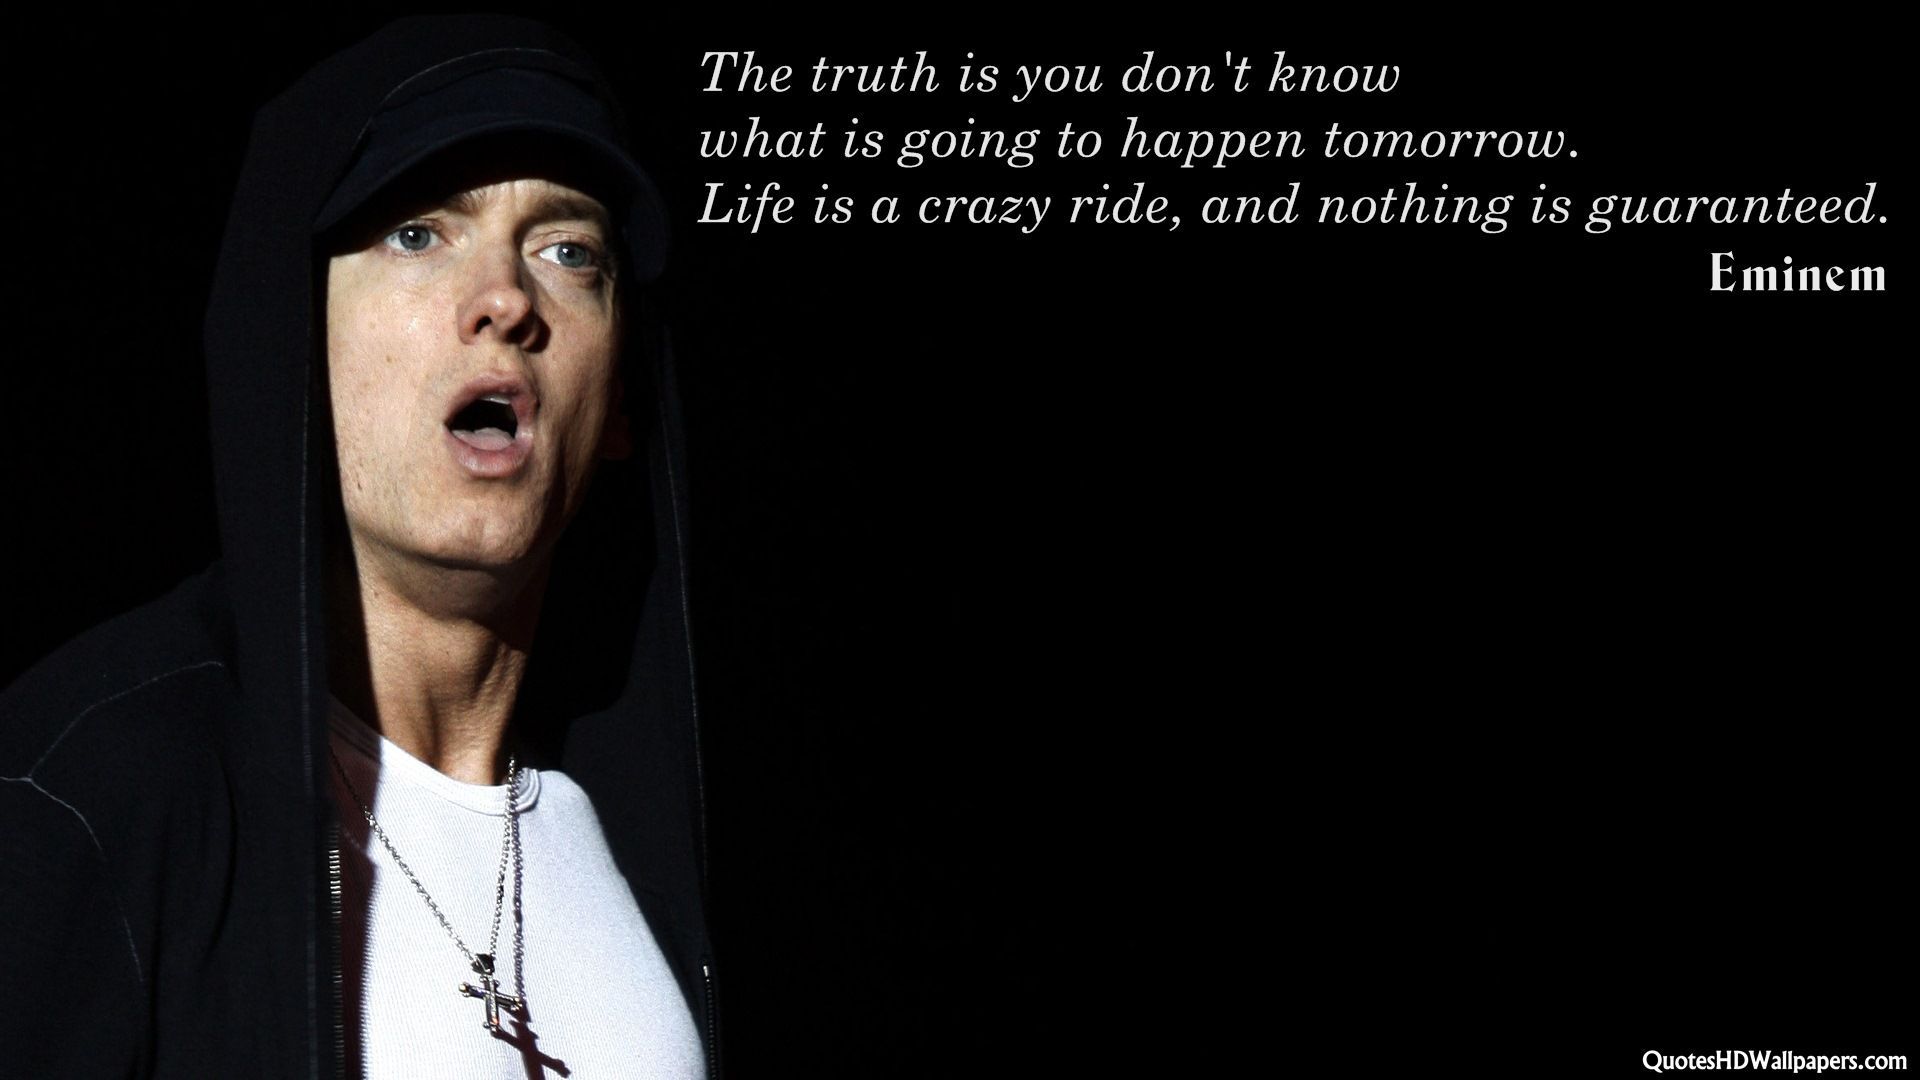 Eminem Quotes Wallpaper For Android Quotes About